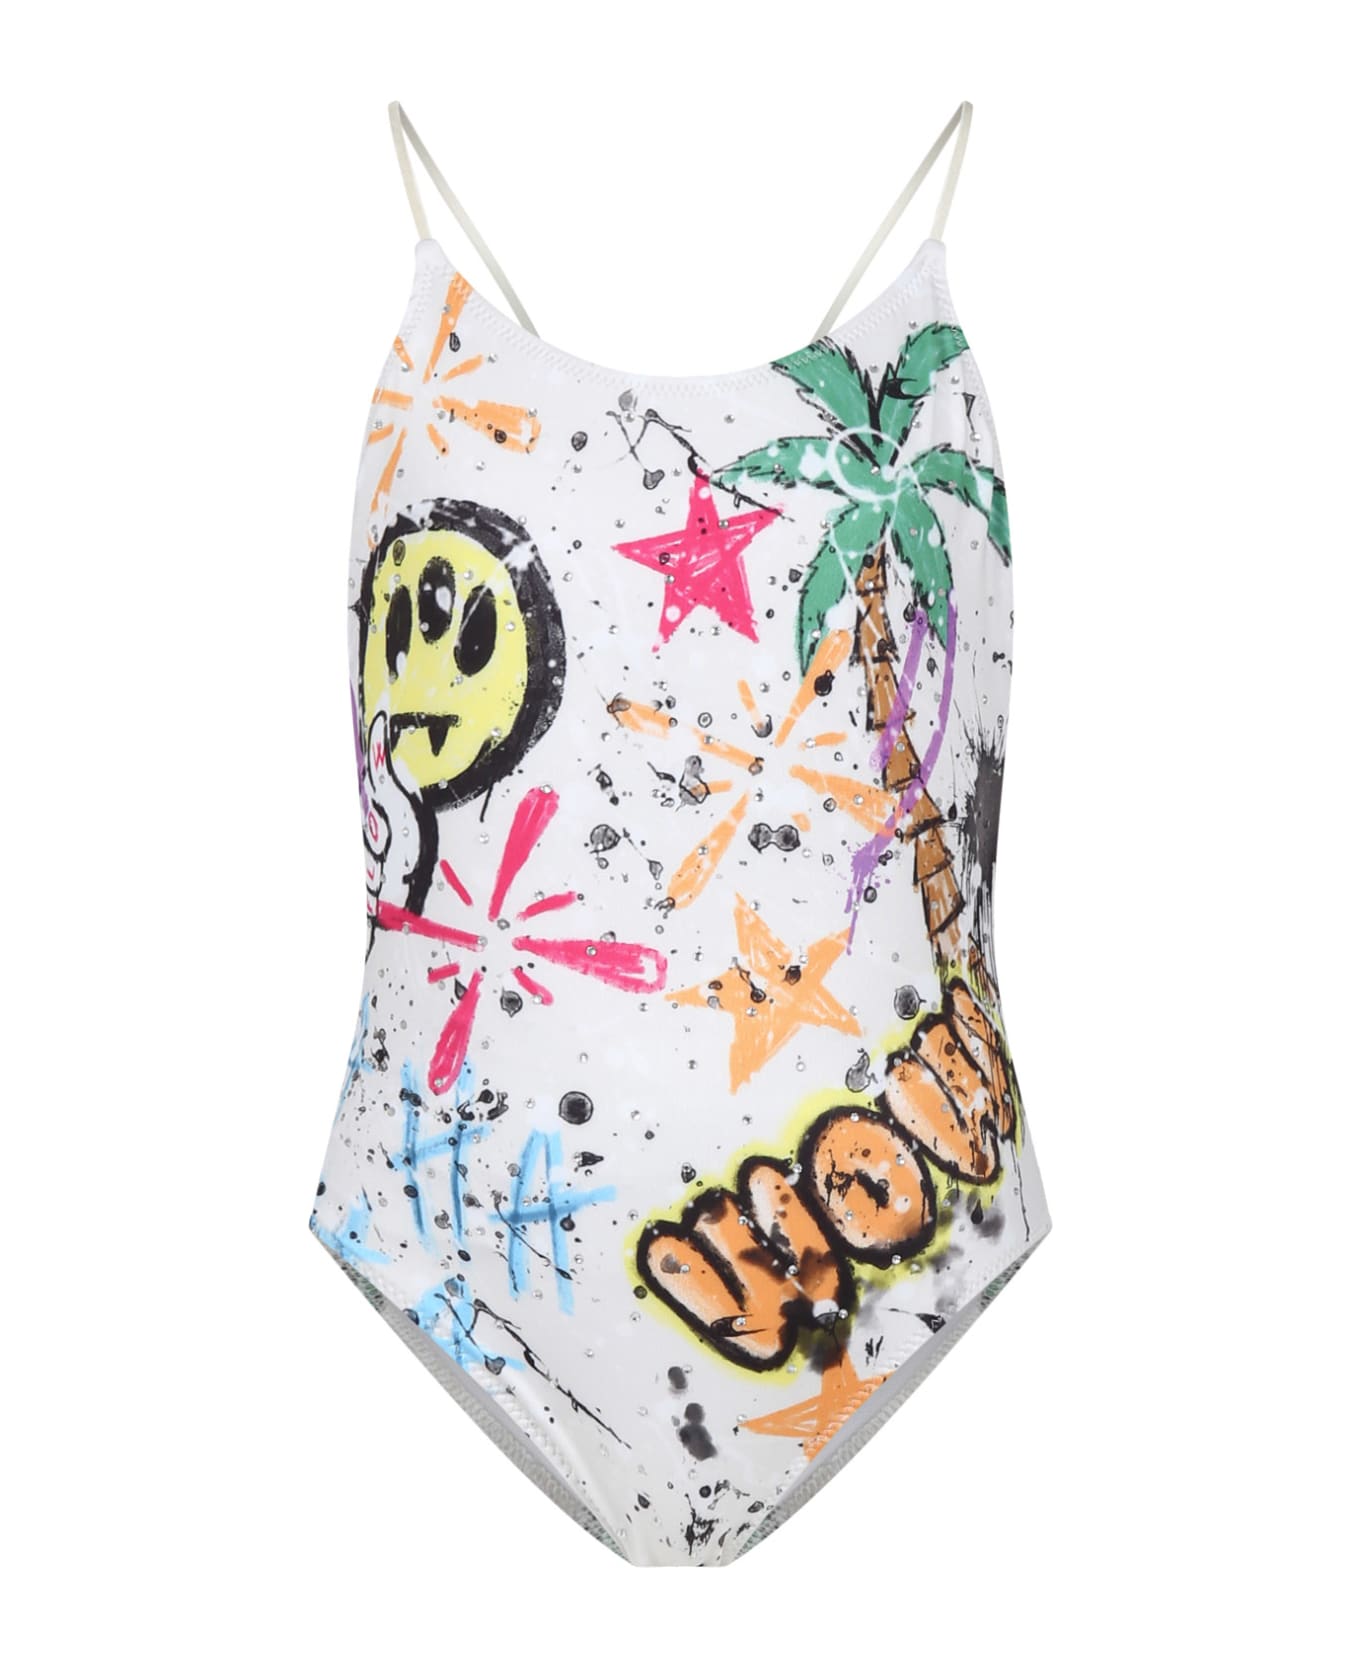 Barrow Ivory Swimsuit For Girl With Palm Tree And Smile Print - Ivory